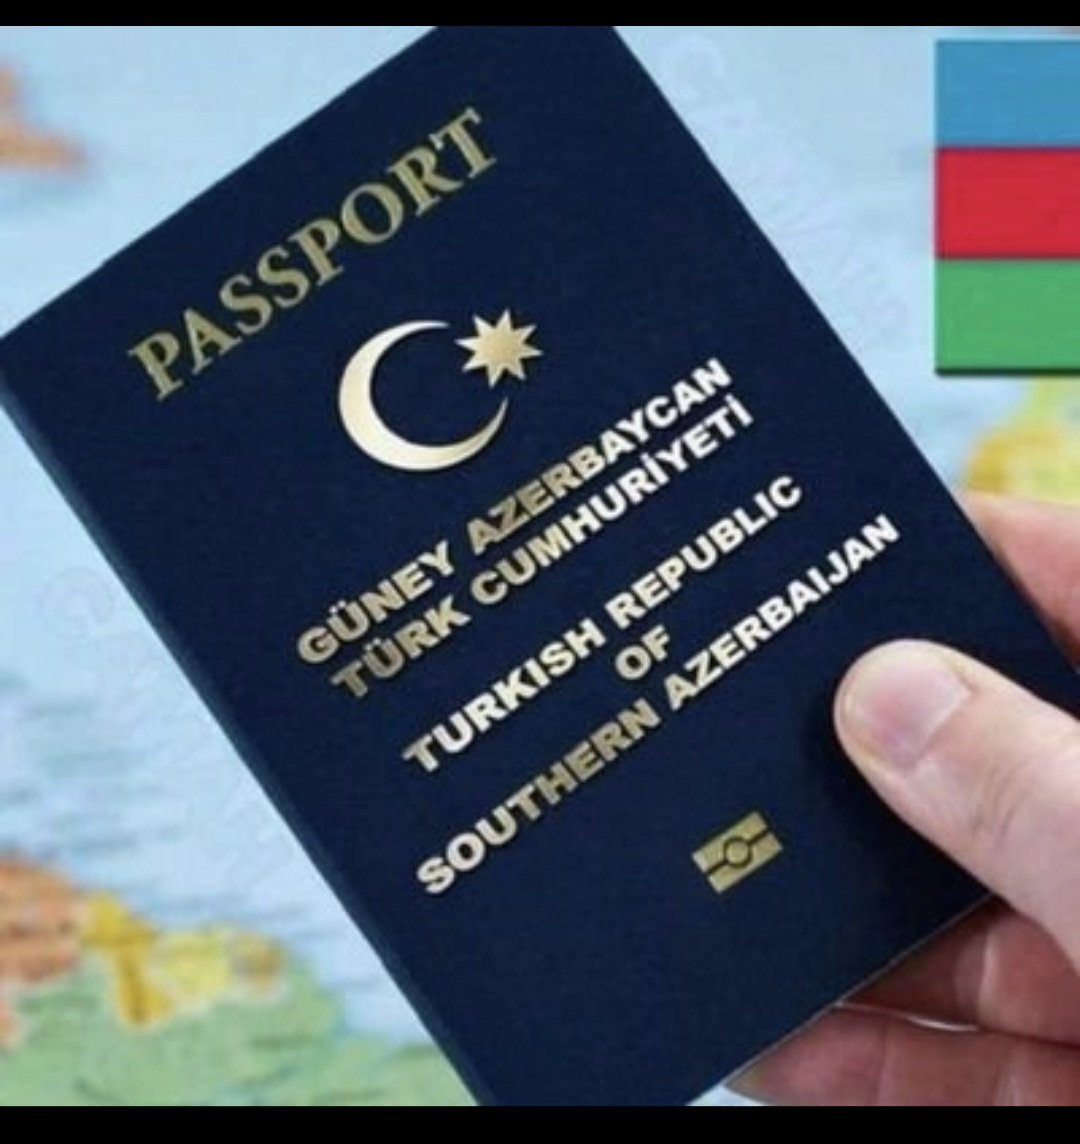 40 million South Azerbaijani Turks' passport; entitle as they obtained their statehood under International Covenant on Economic, Social and Cultural Rights (1966), art.1 (ICESCR), and International Covenant on Civil and Political Rights (1966), art.1 (ICCPR).
#SouthAzerbaijan